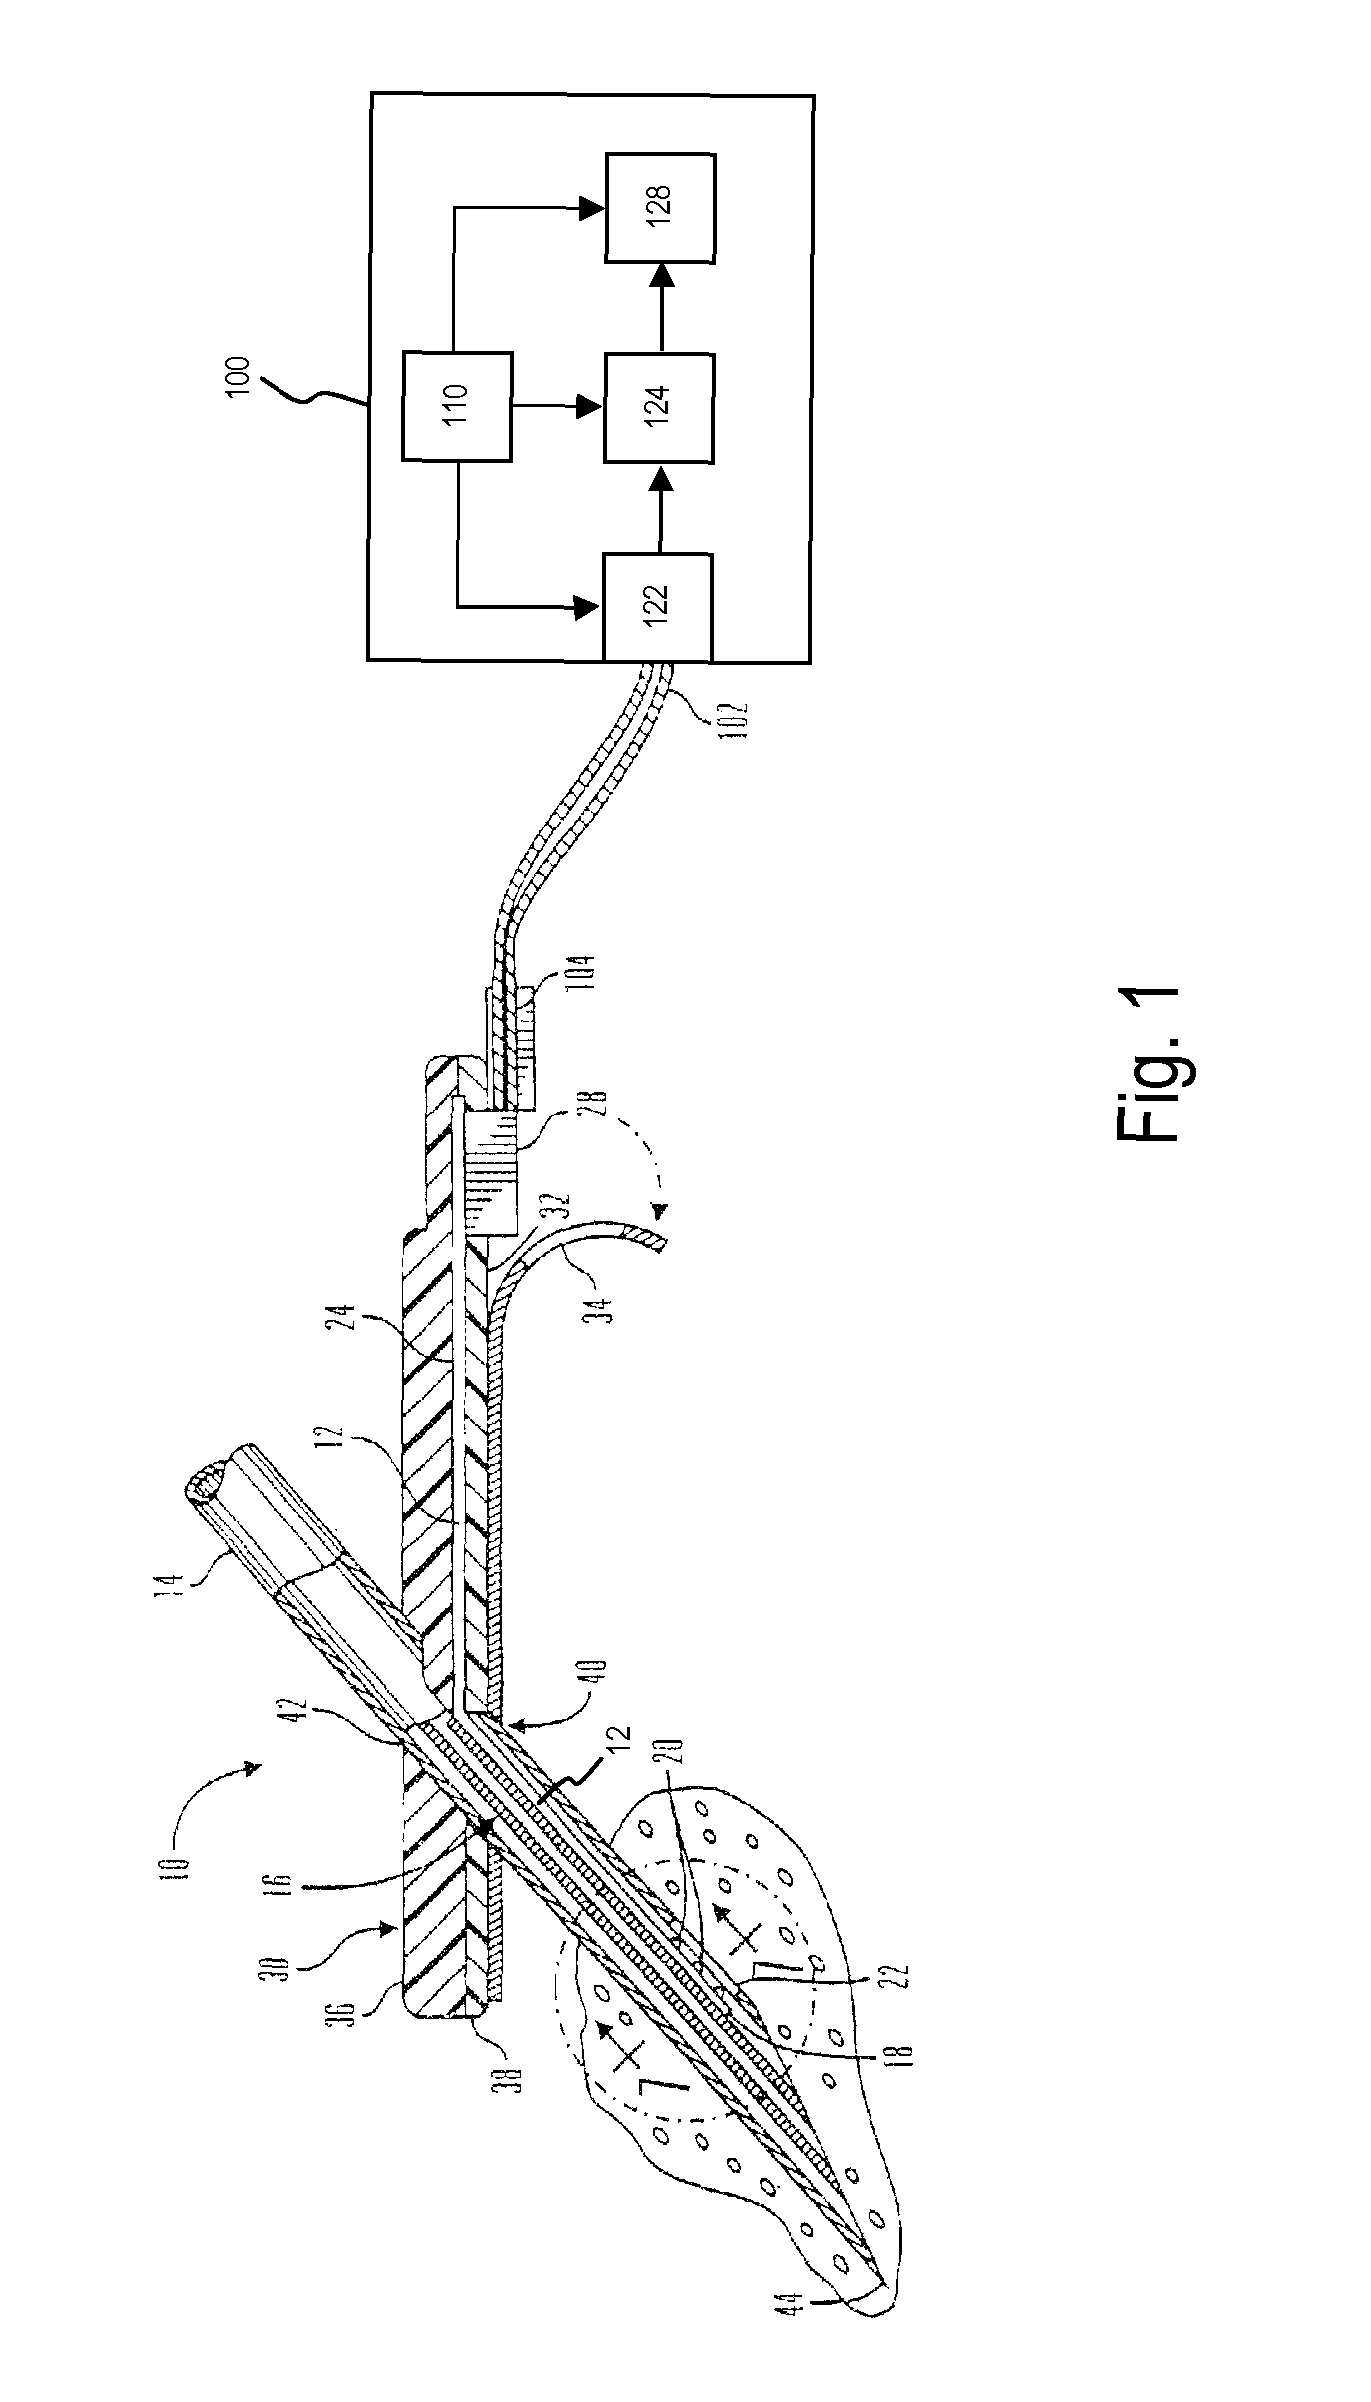 Method and system for detecting age, hydration, and functional states of sensors using electrochemical impedance spectroscopy